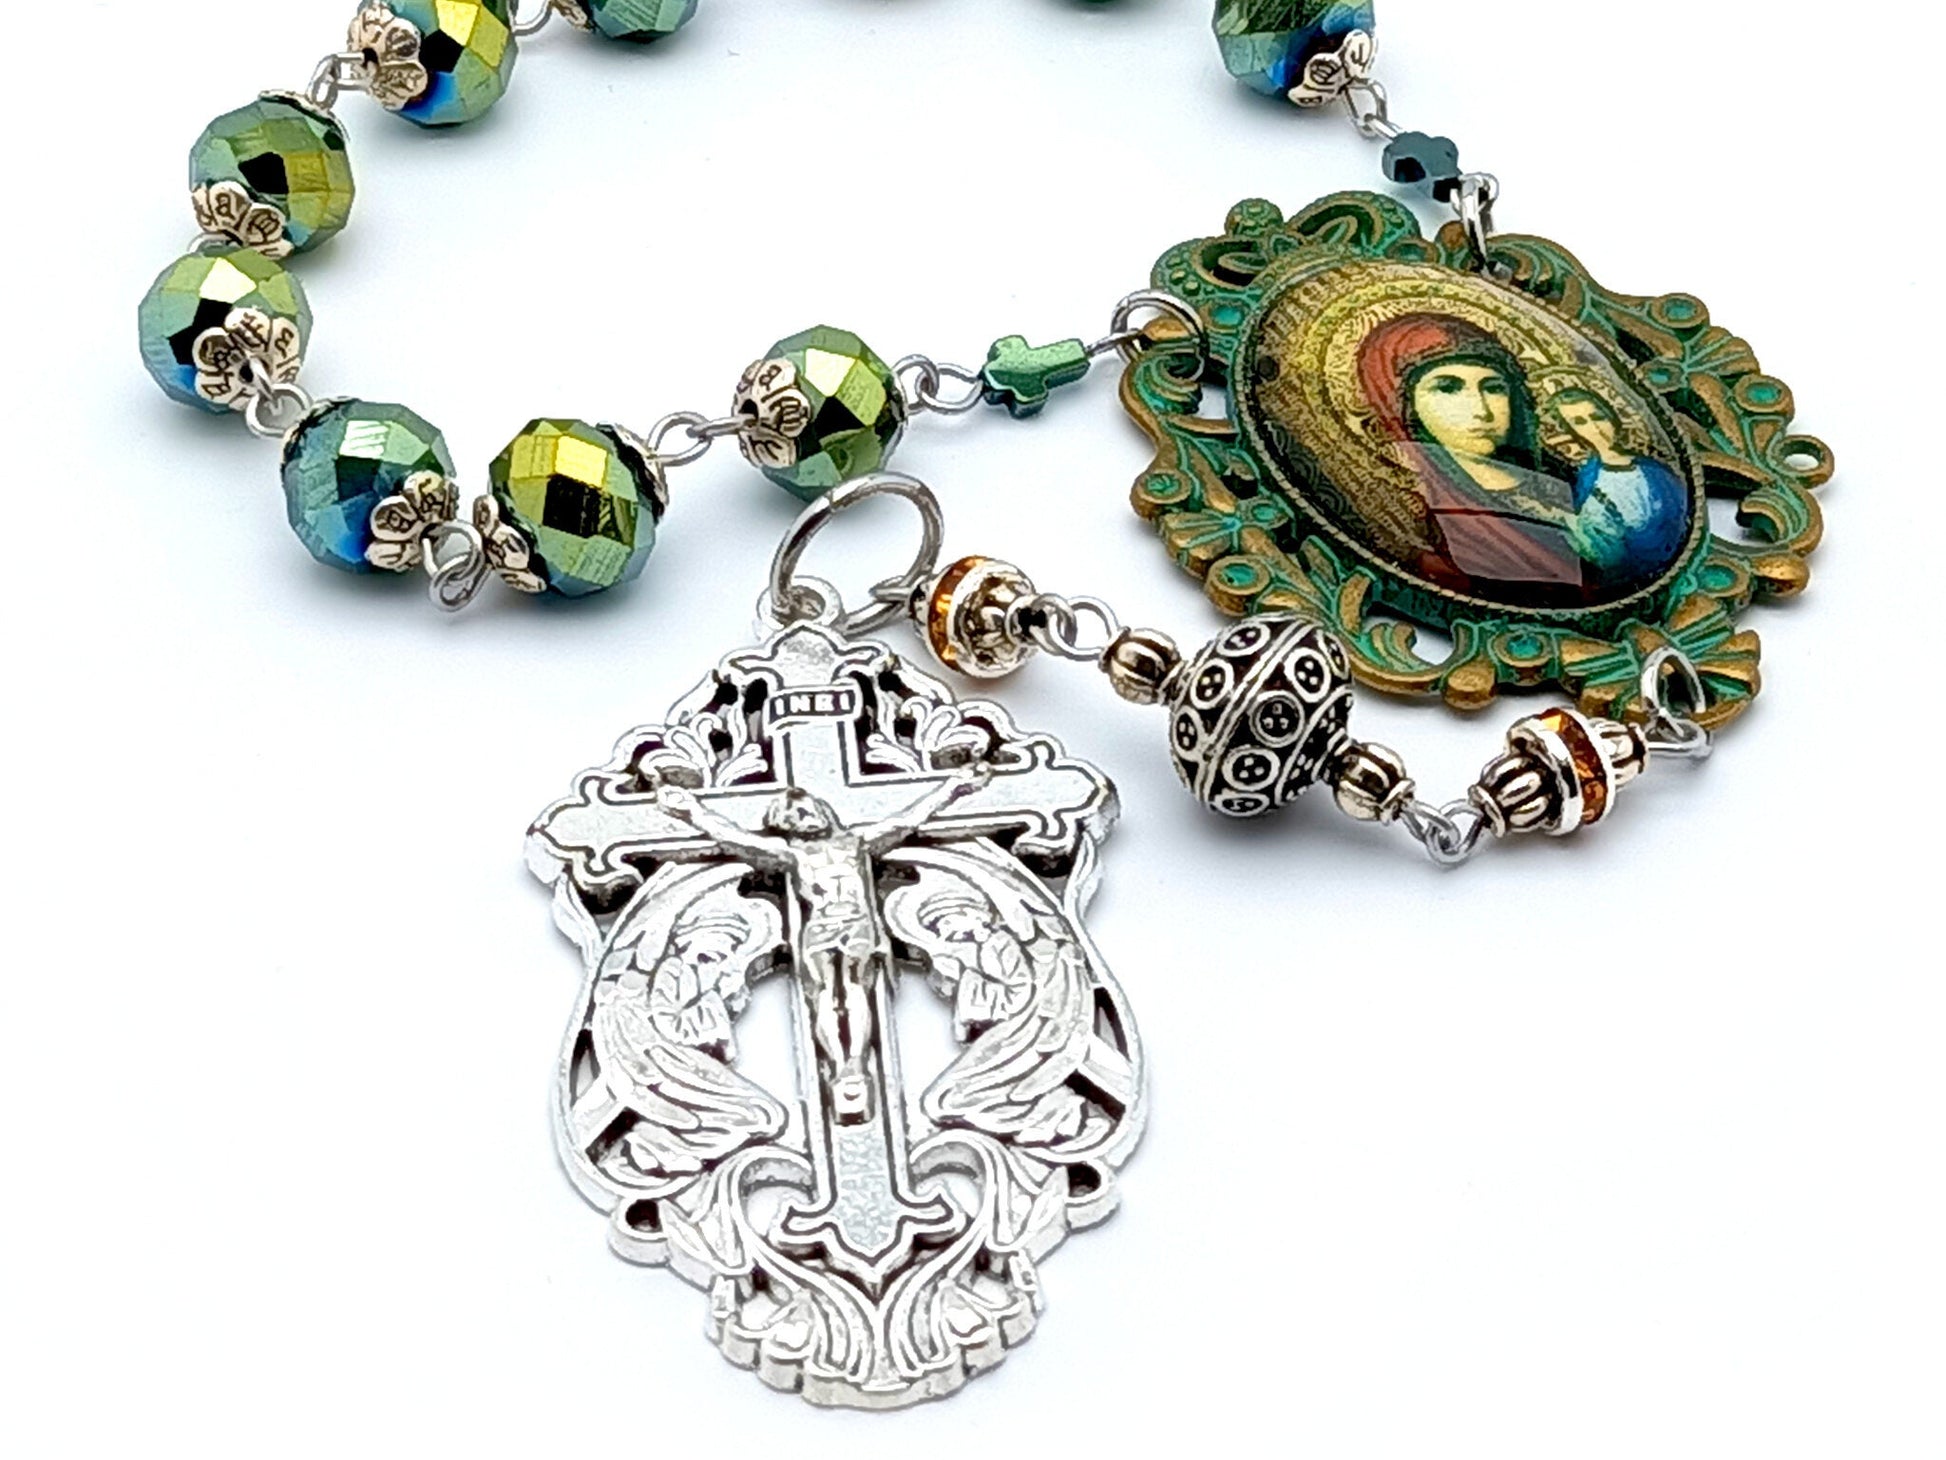 Our Lady of Perpetual Succor unique rosary beads single decade rosary with green faceted glass beads, silver two angels crucifix and verdigris picture centre medal. 